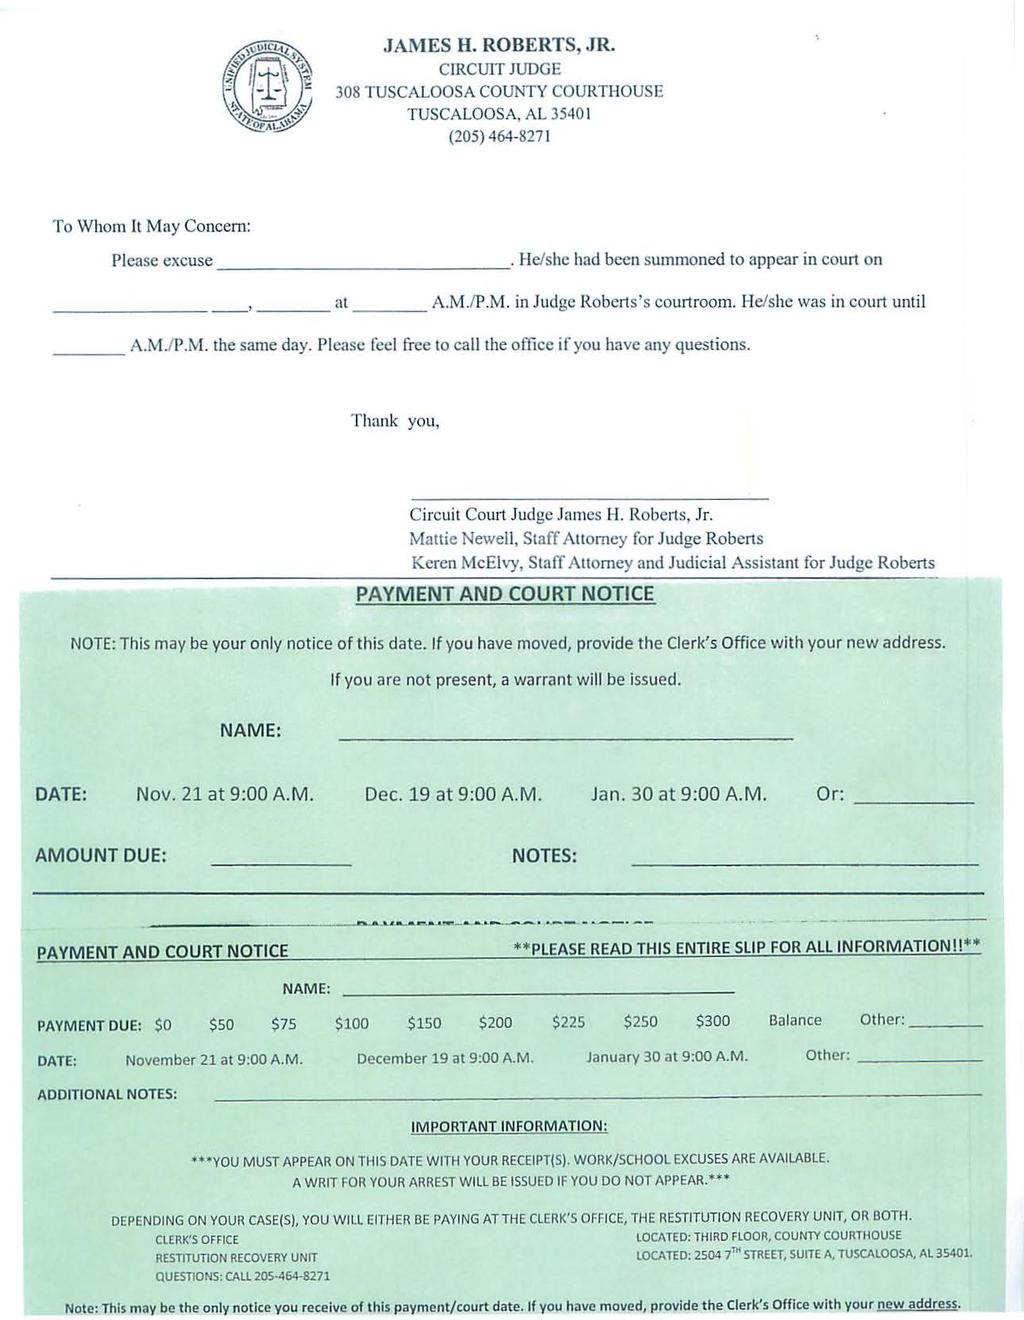 Note: This may be the only notice you receive of this payment/court date. If you have moved, provide the Clerk's Office with your new address. JAMES H. ROBERTS, JR.